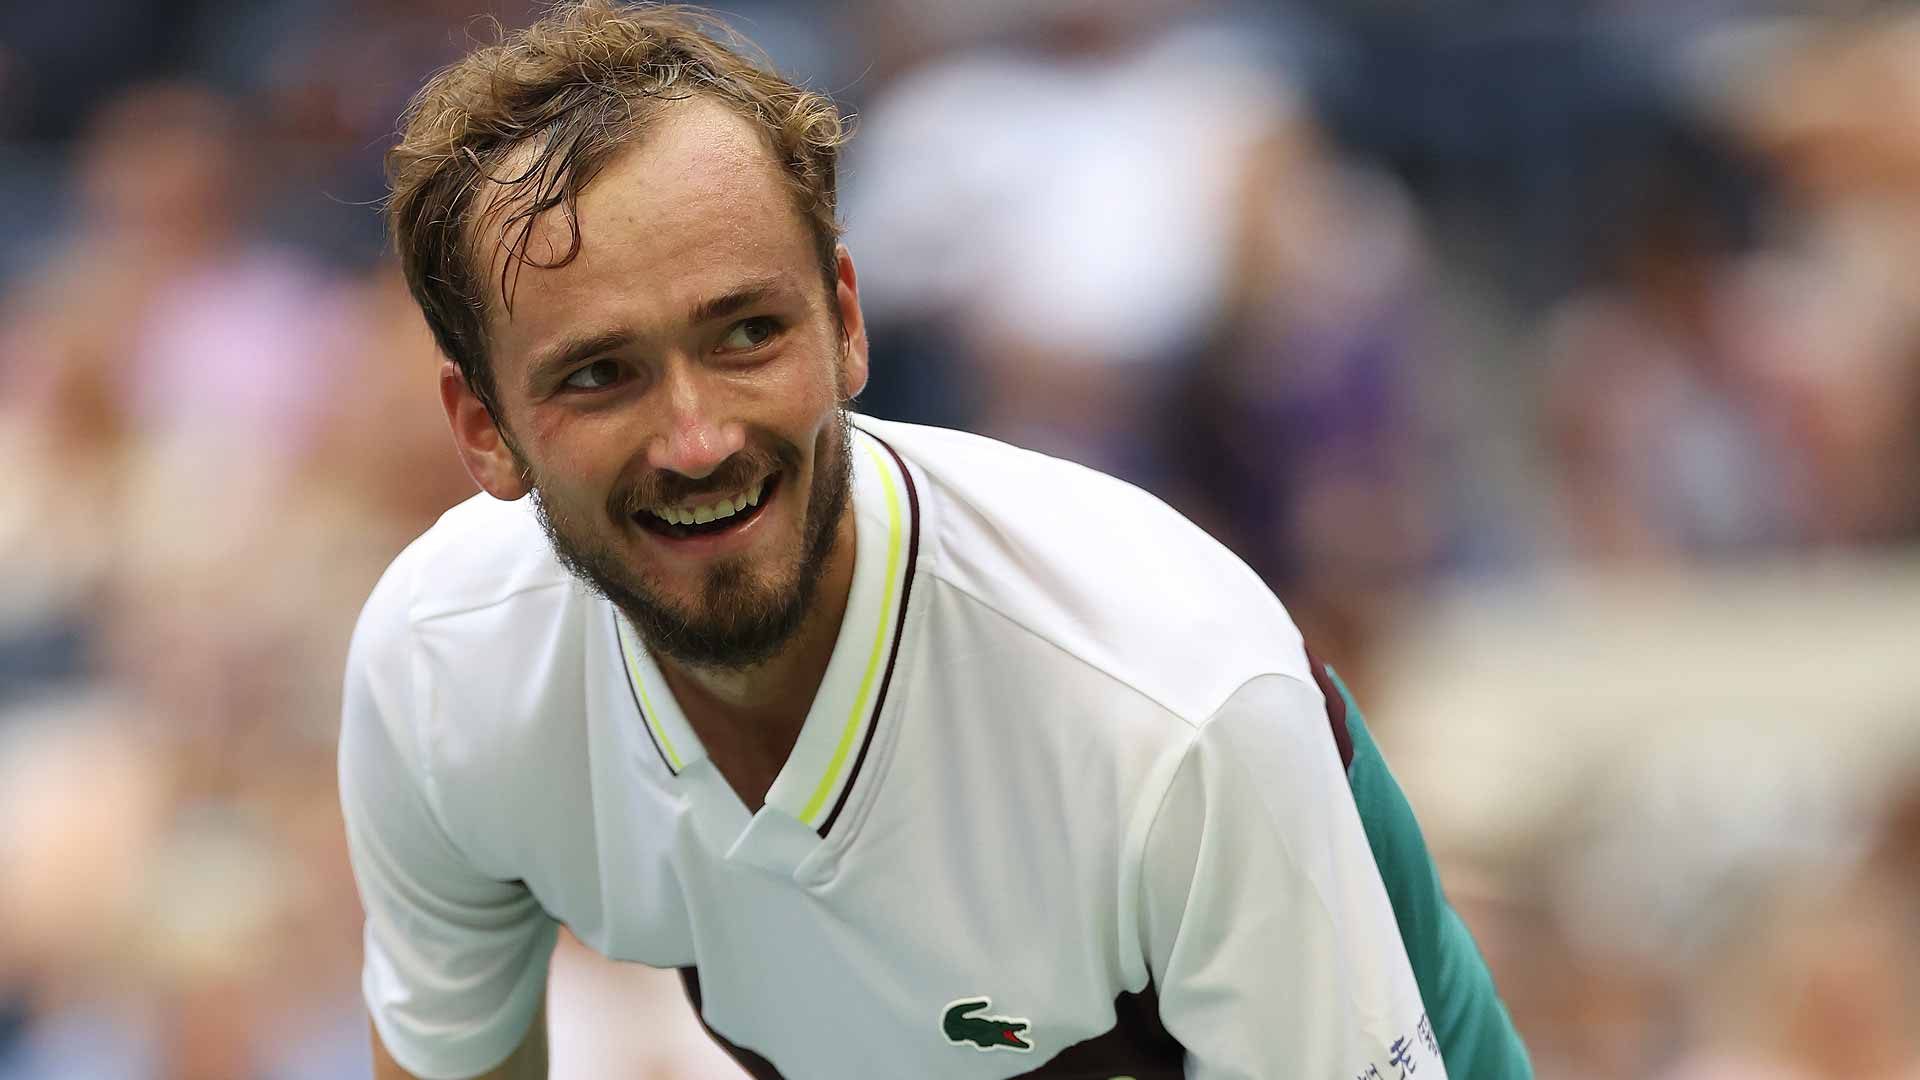 Daniil Medvedev defeats Andrey Rublev to reach the US Open semi-finals for the fourth time.